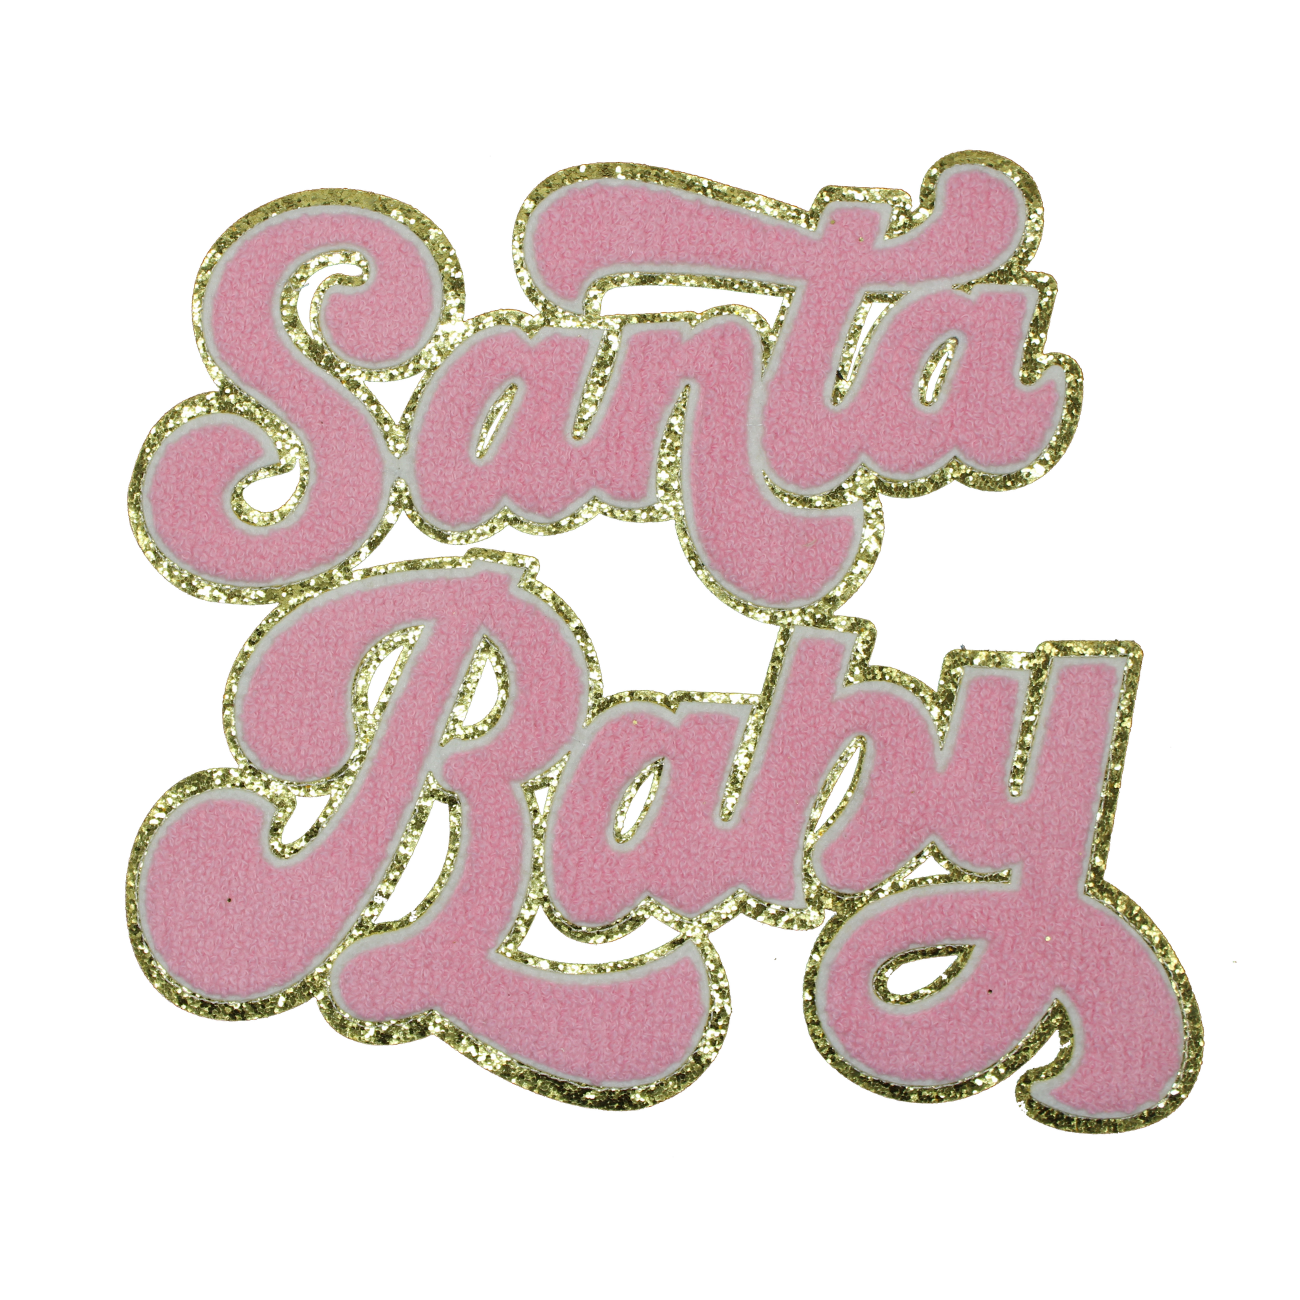 Santa Baby Patch (Large/Chenille)